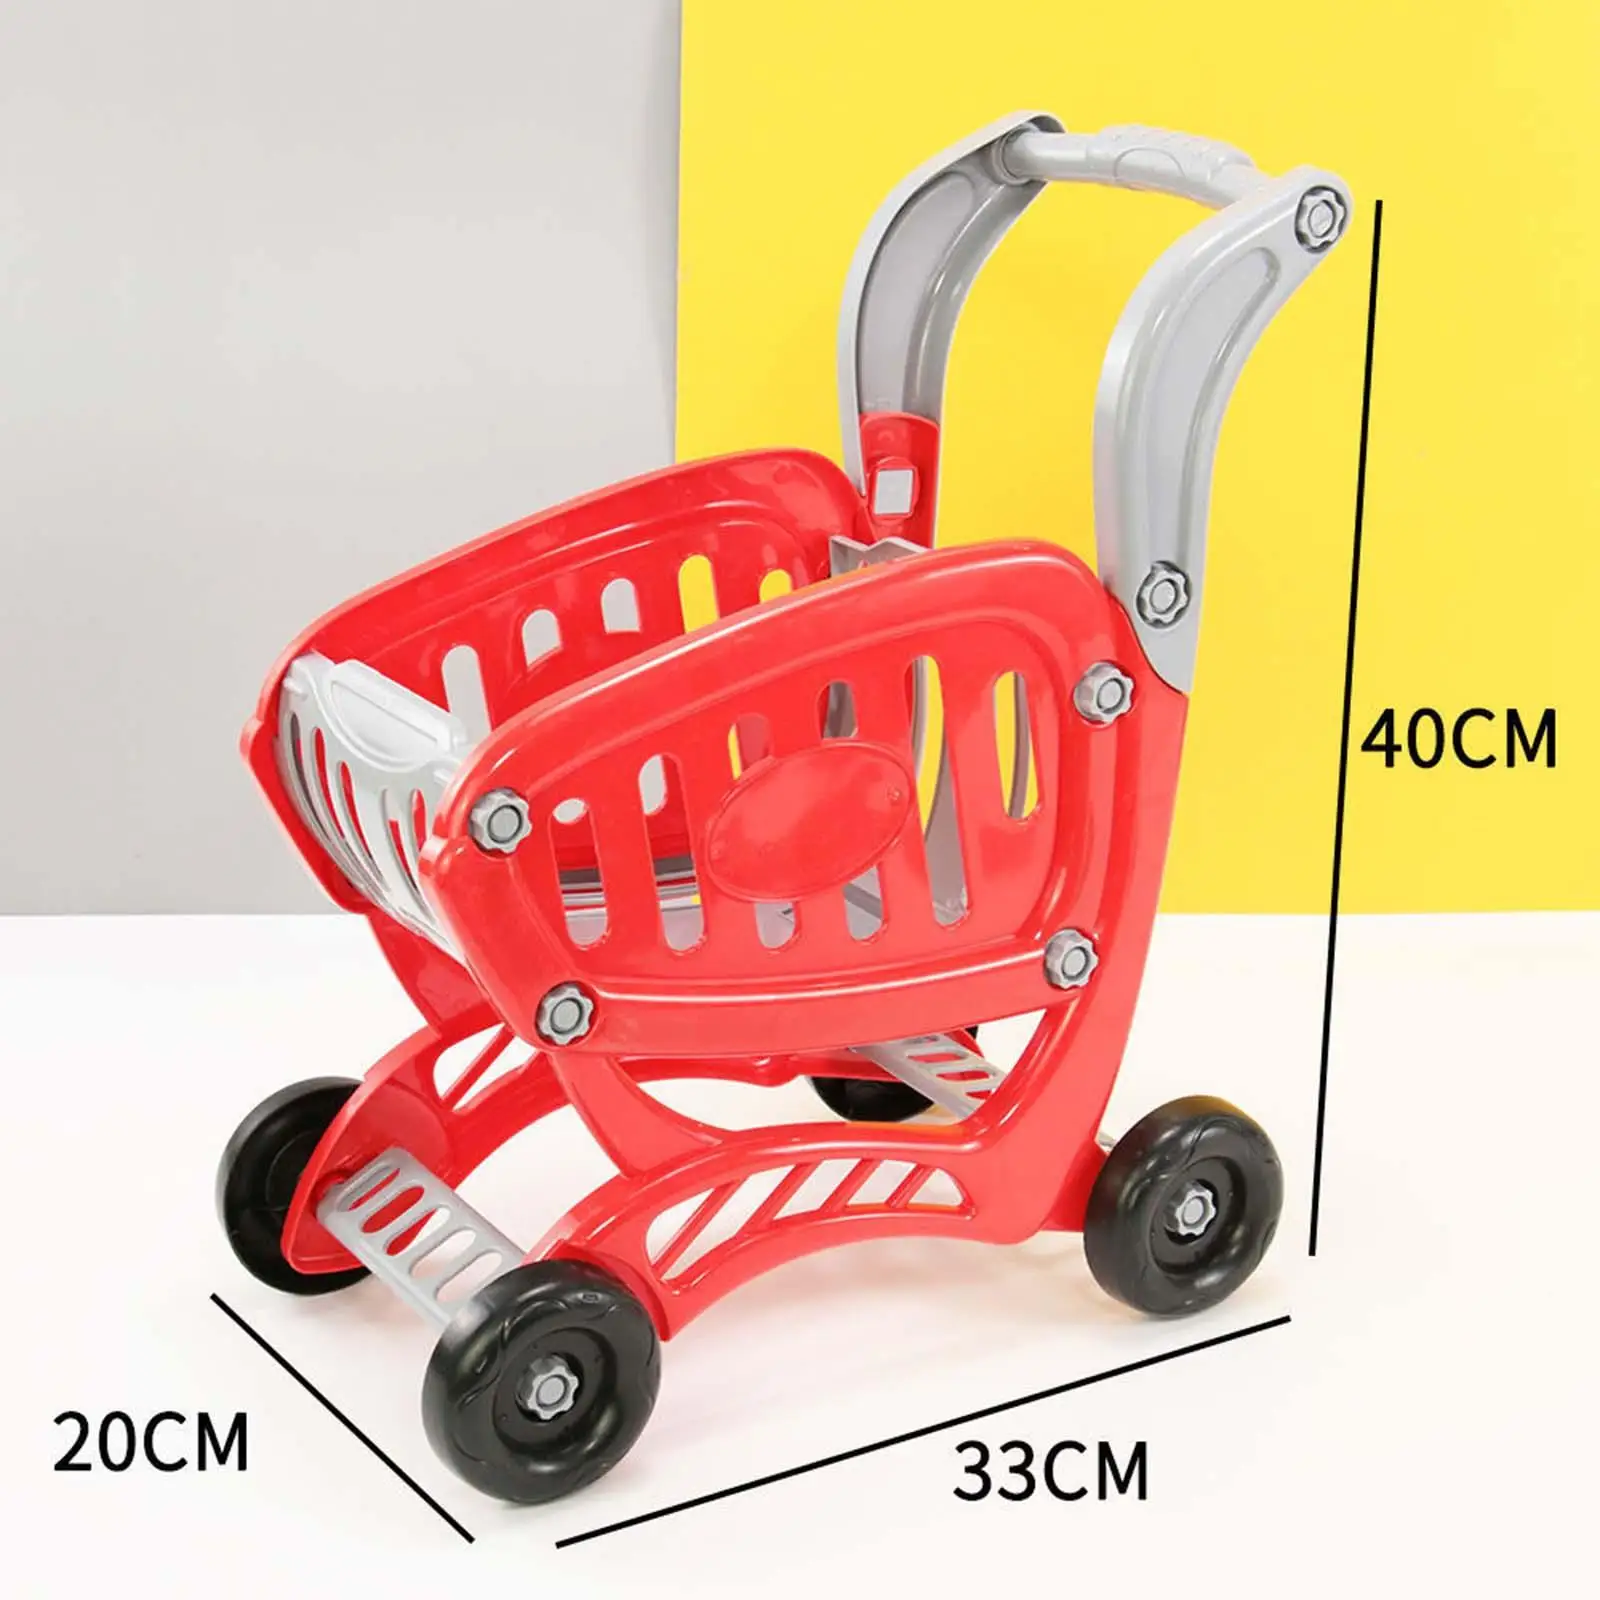 Simulation Children`s Shopping Cart Toy Shop Shopping Cart for